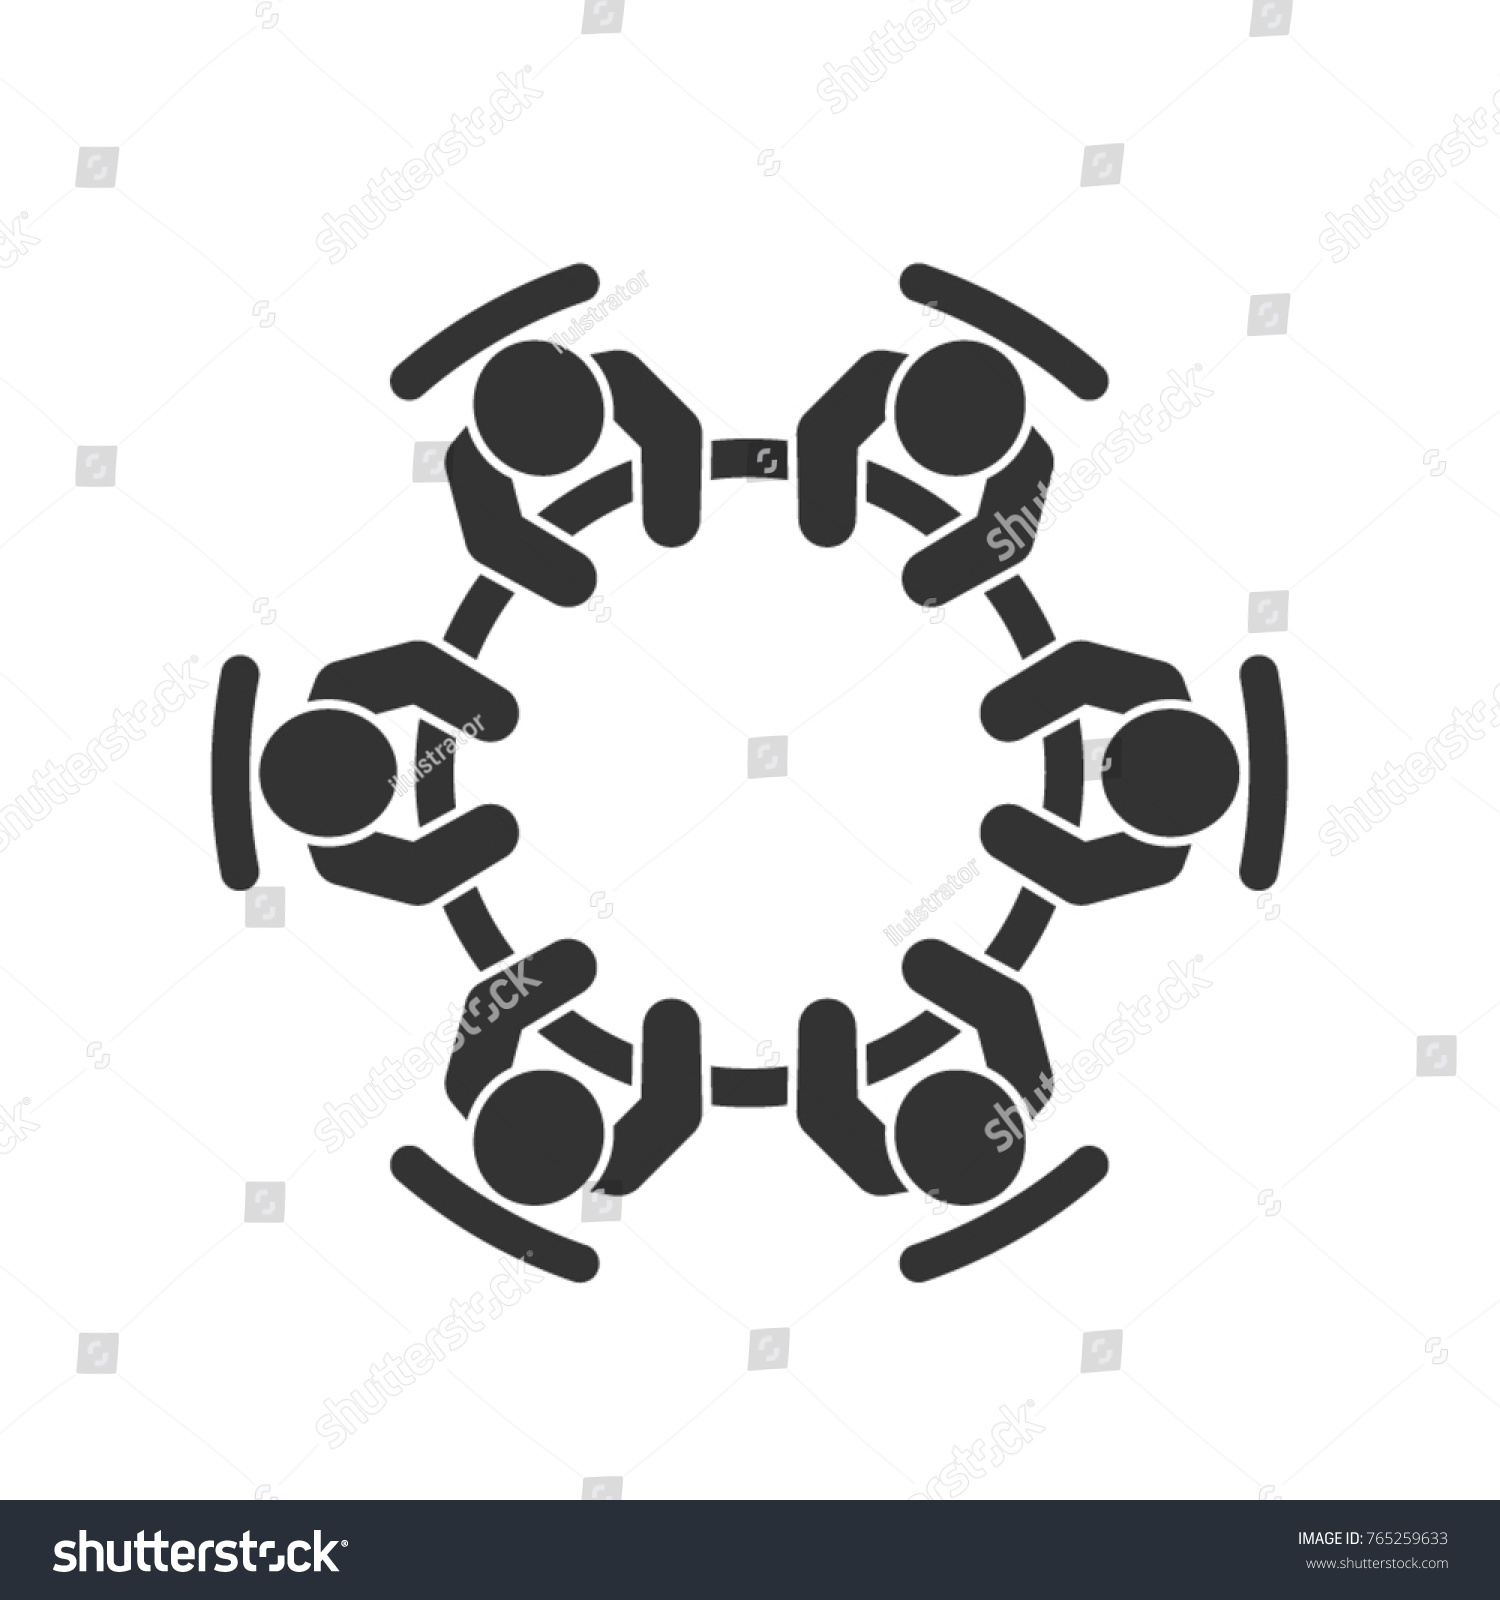 SVG of Brainstorming and teamwork icon. Business meeting. Debate team. Discussion group. People in conference room sitting around a table working together on new creative projects.  svg